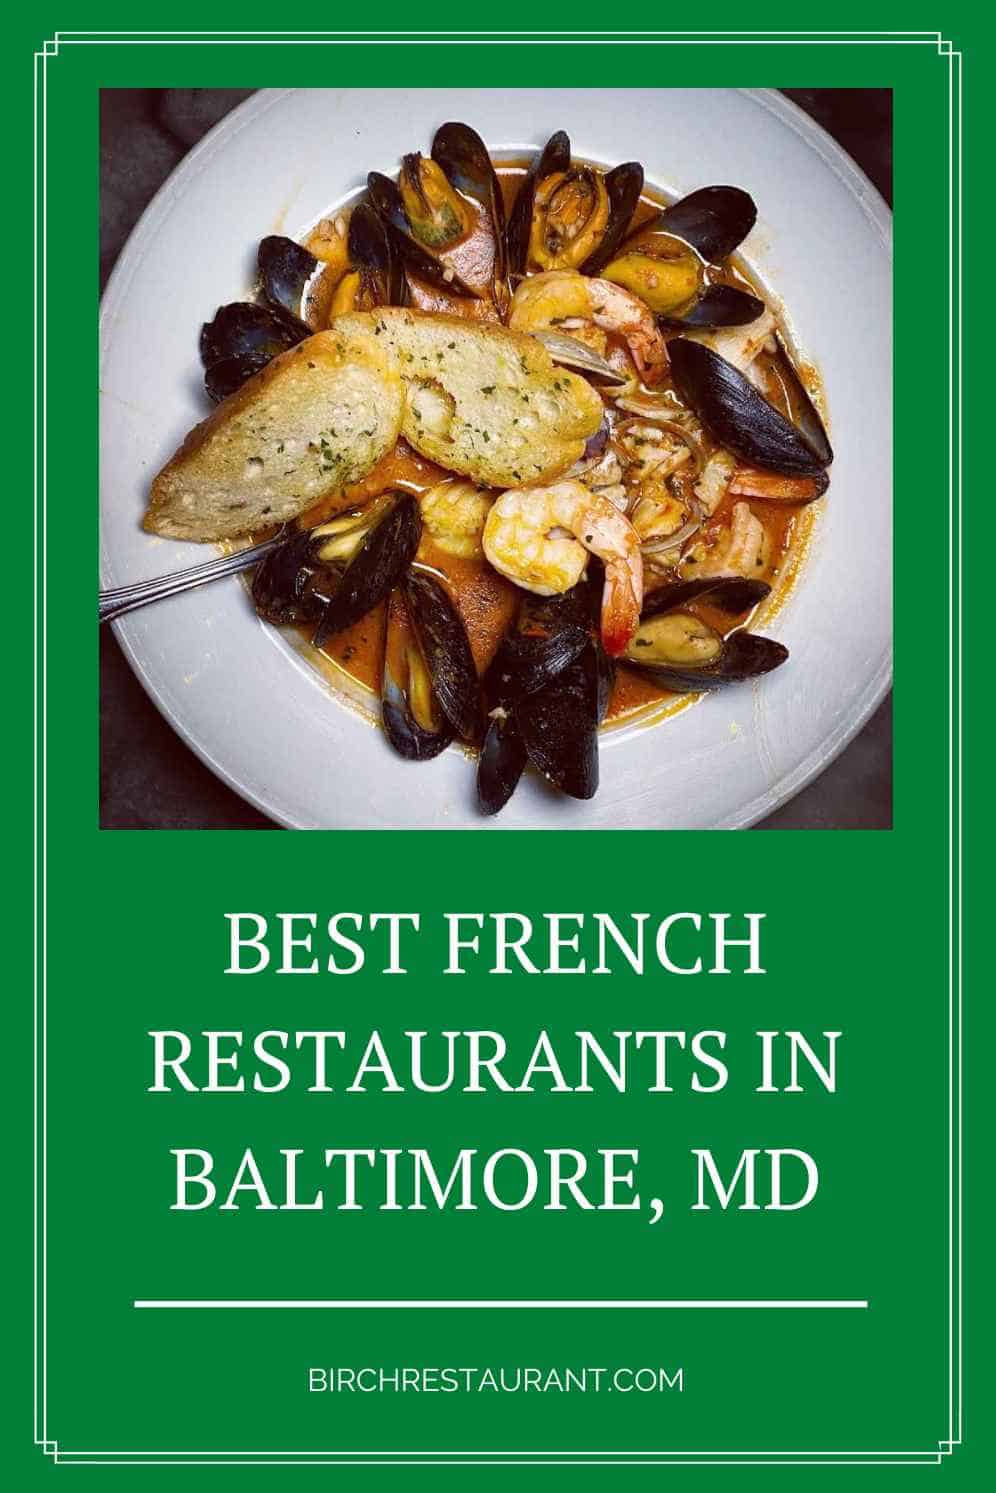 French Restaurants in Baltimore, MD